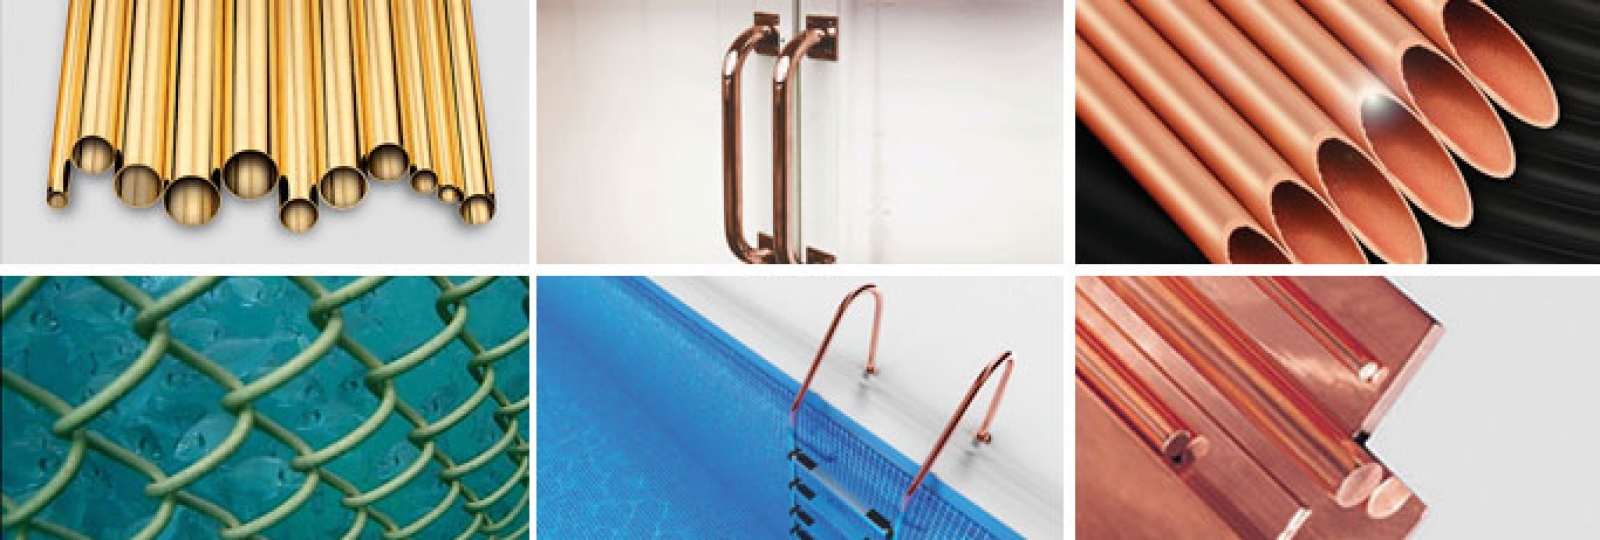 copper products_2